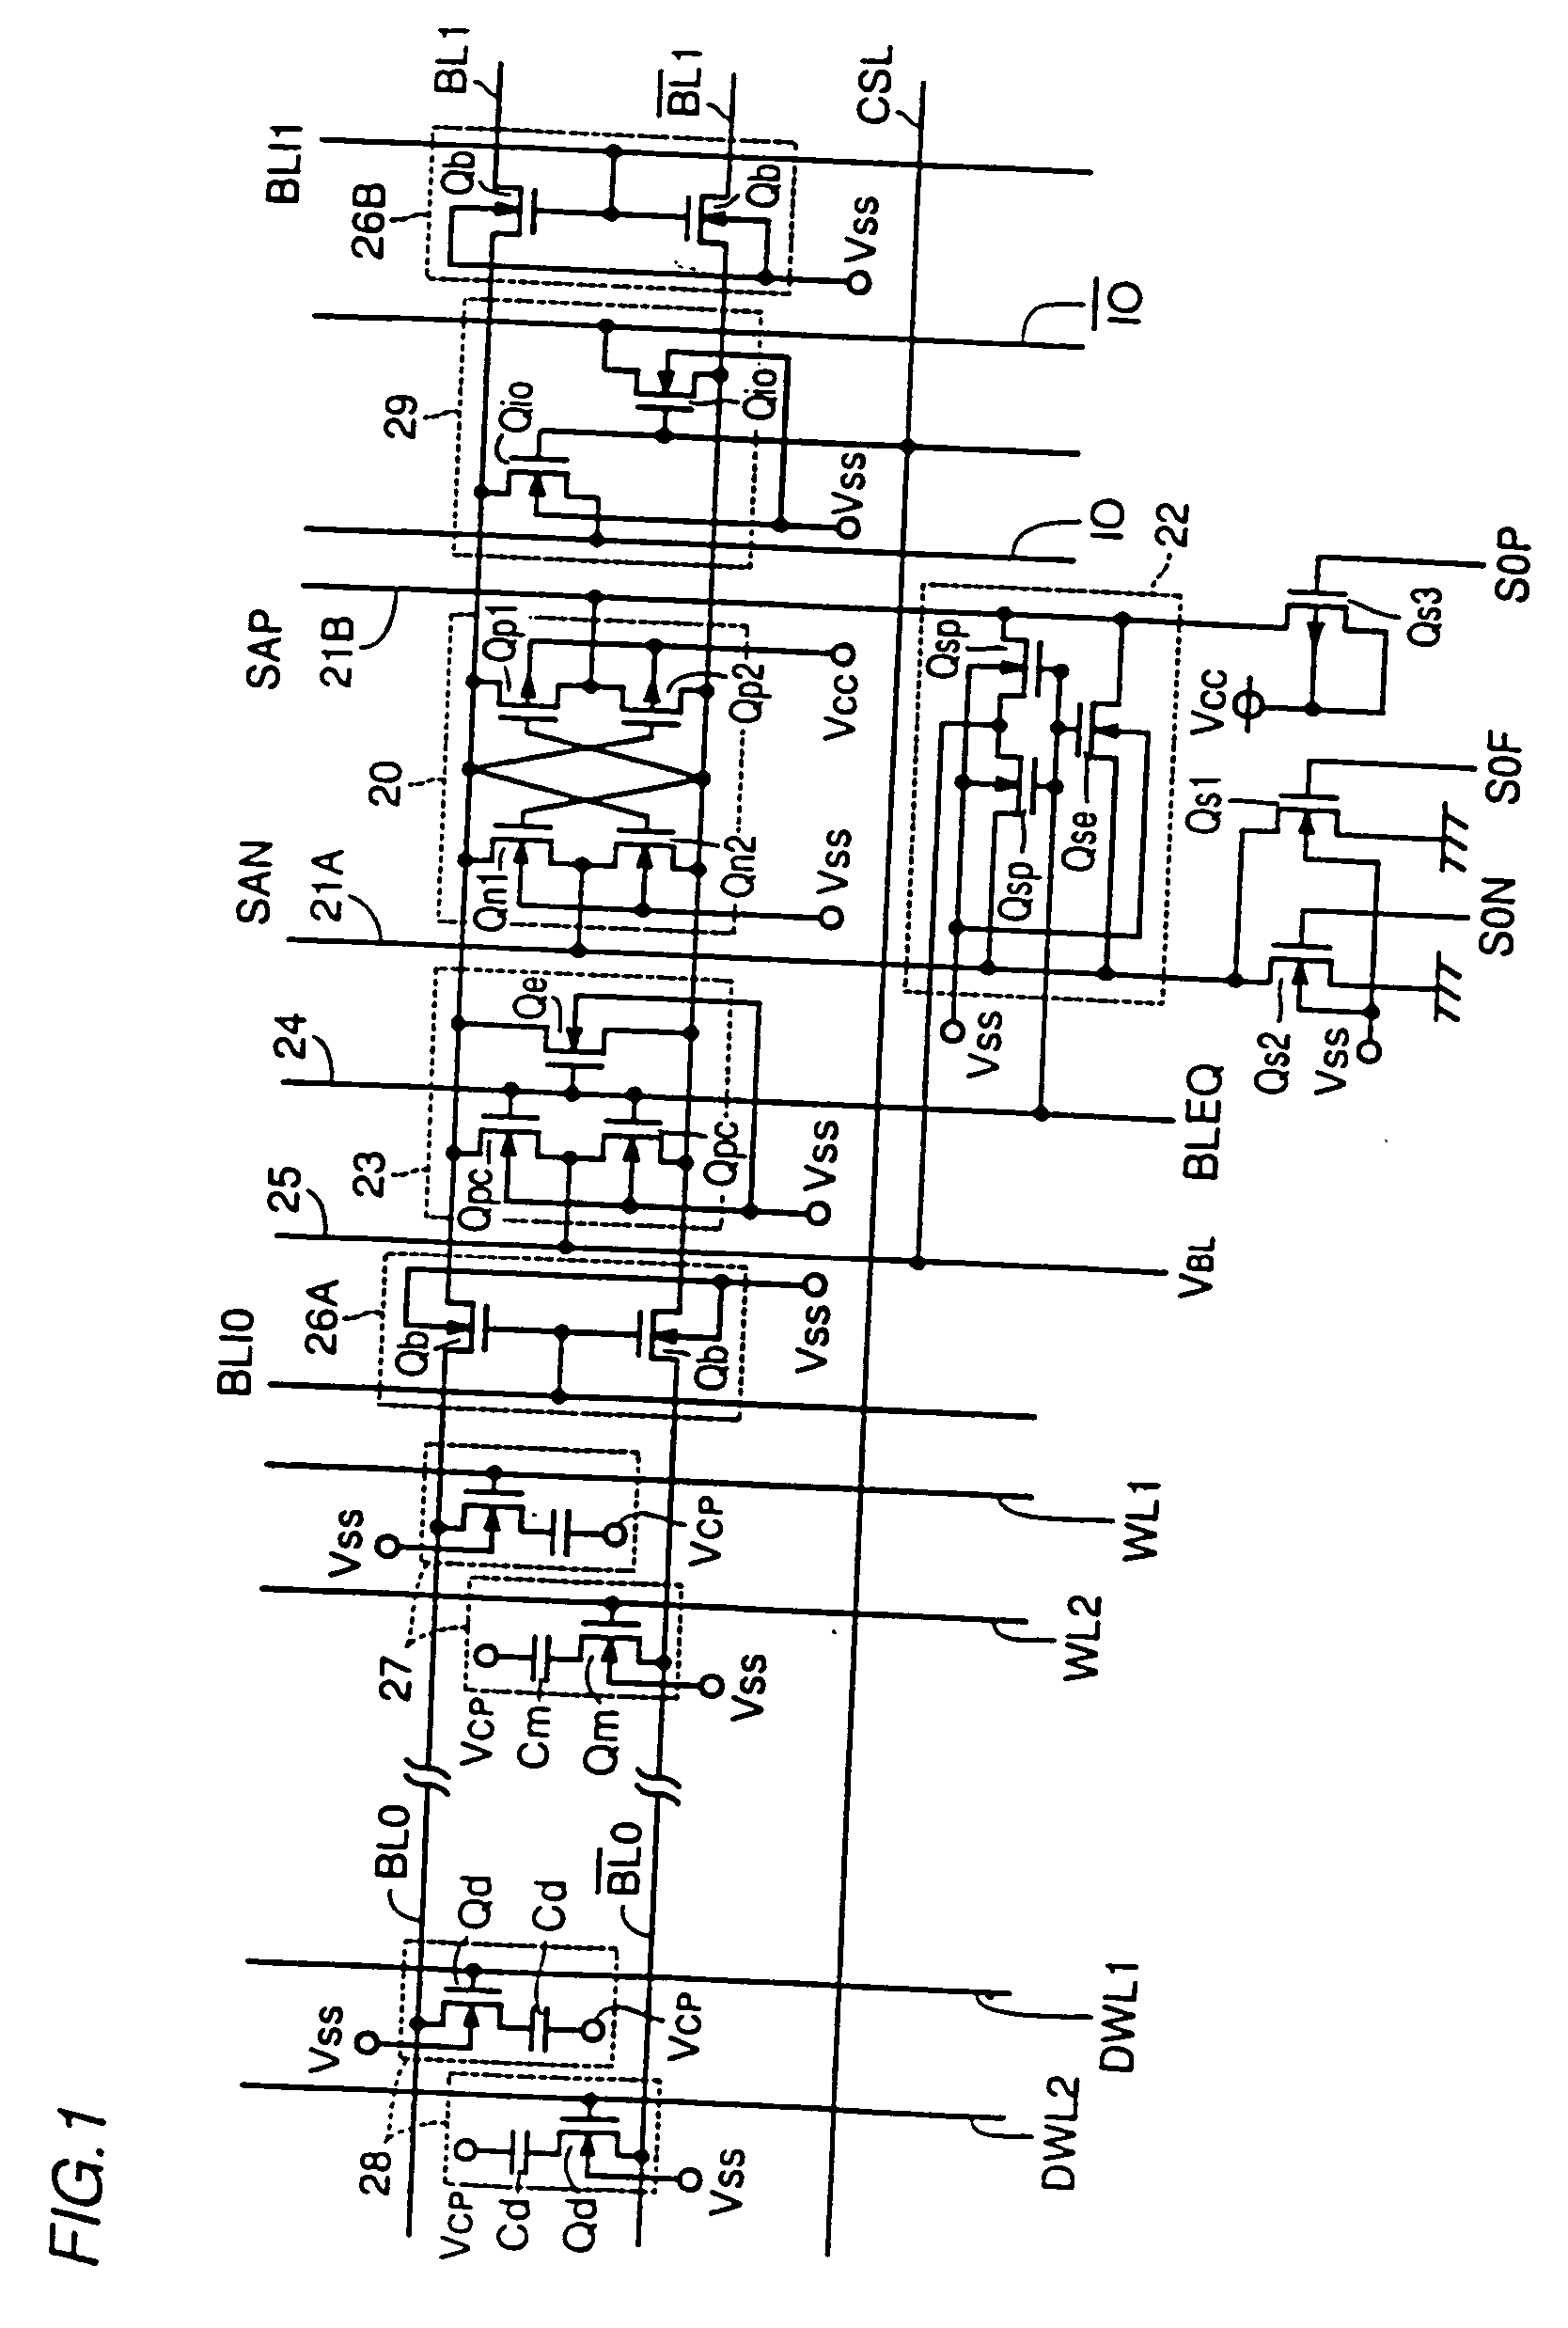 Semiconductor memory device including an SOI